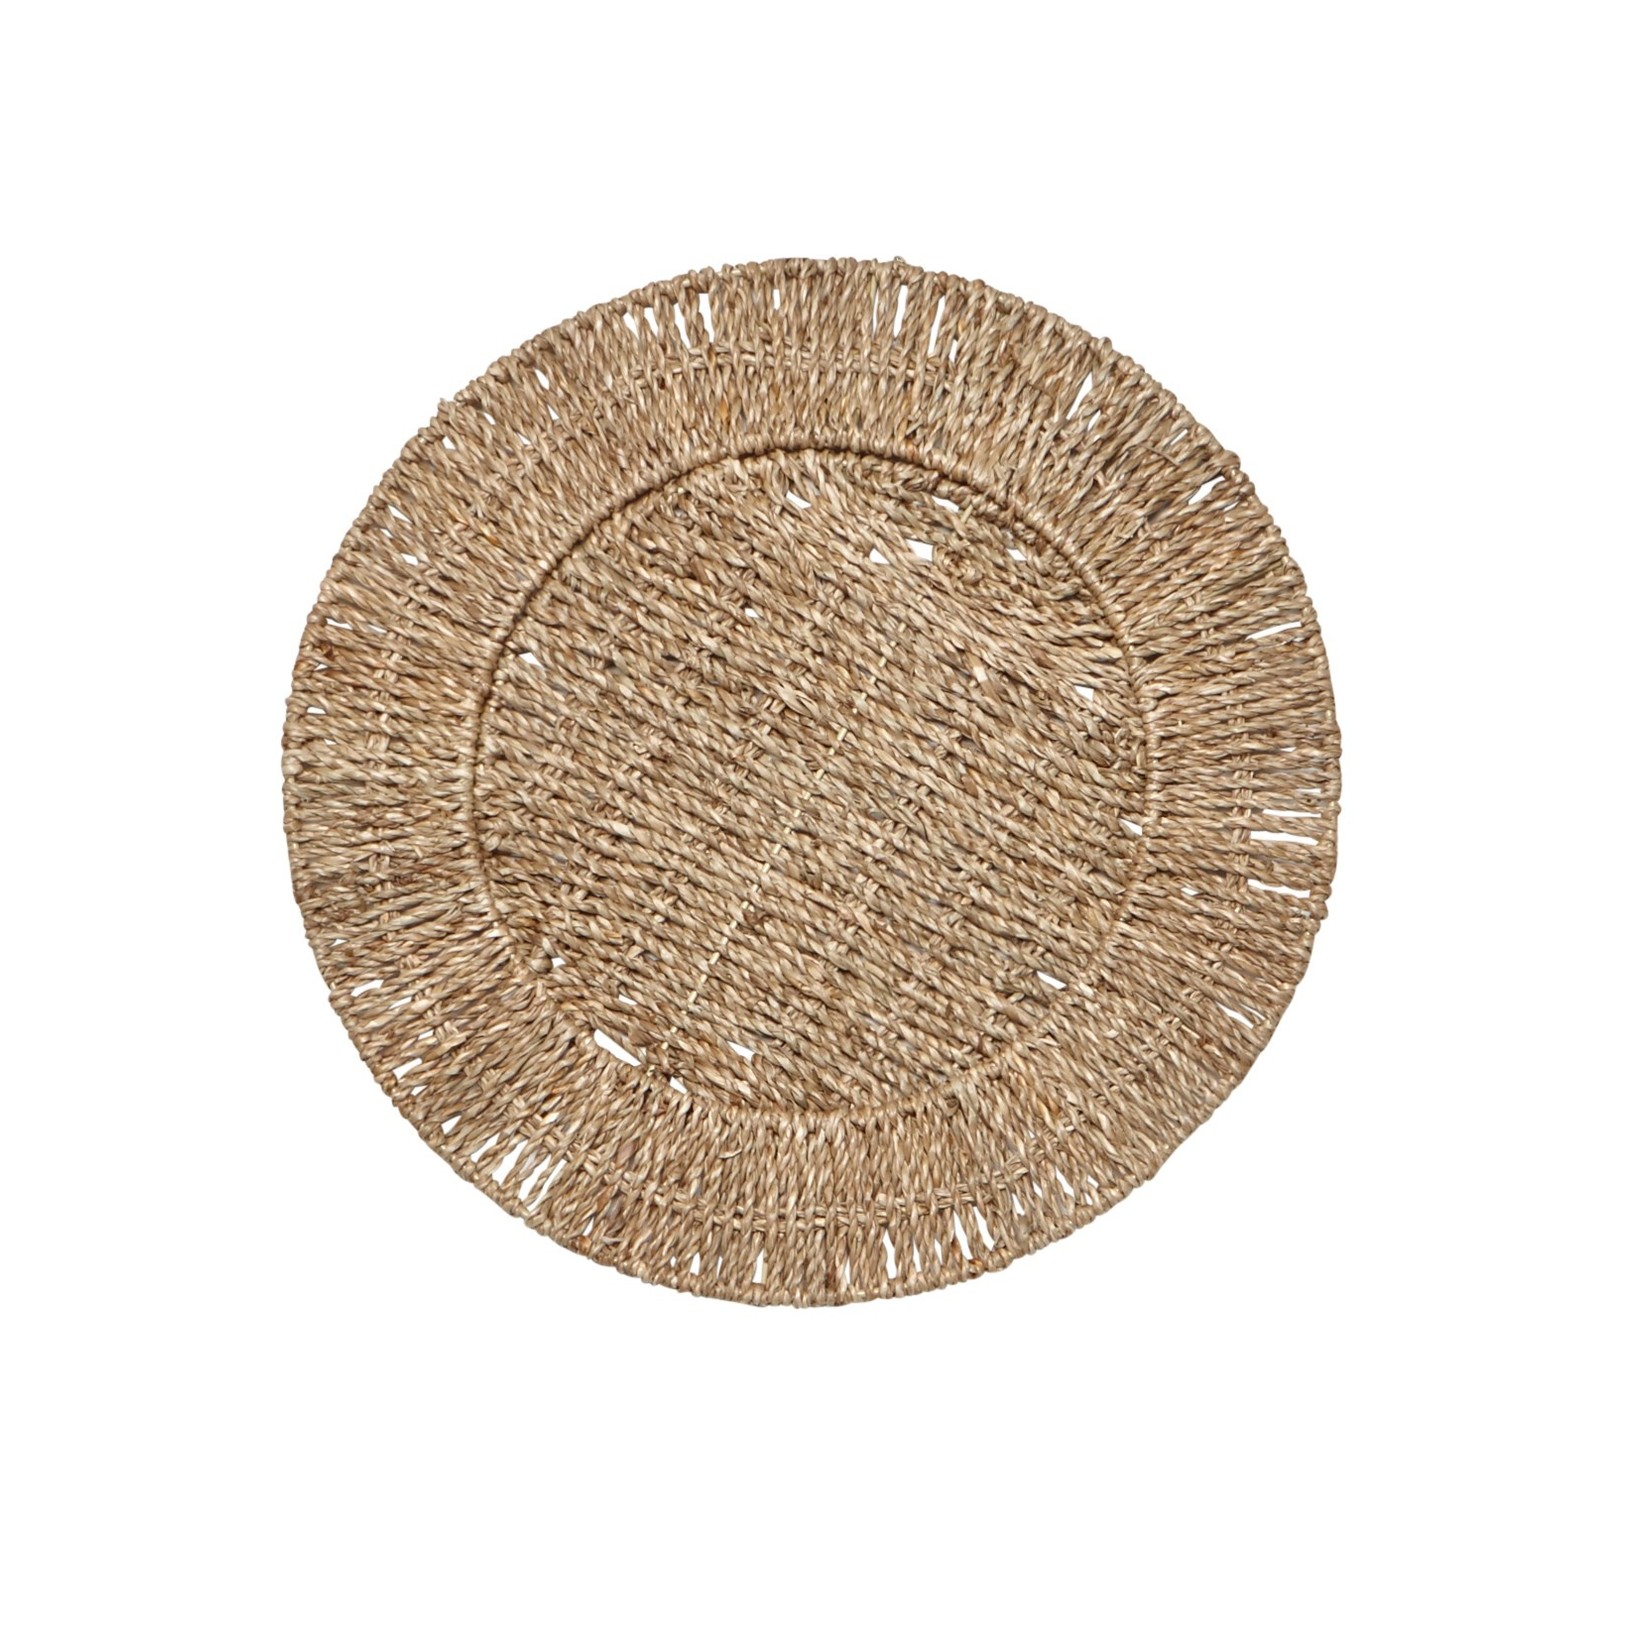 Woven Seagrass Charger